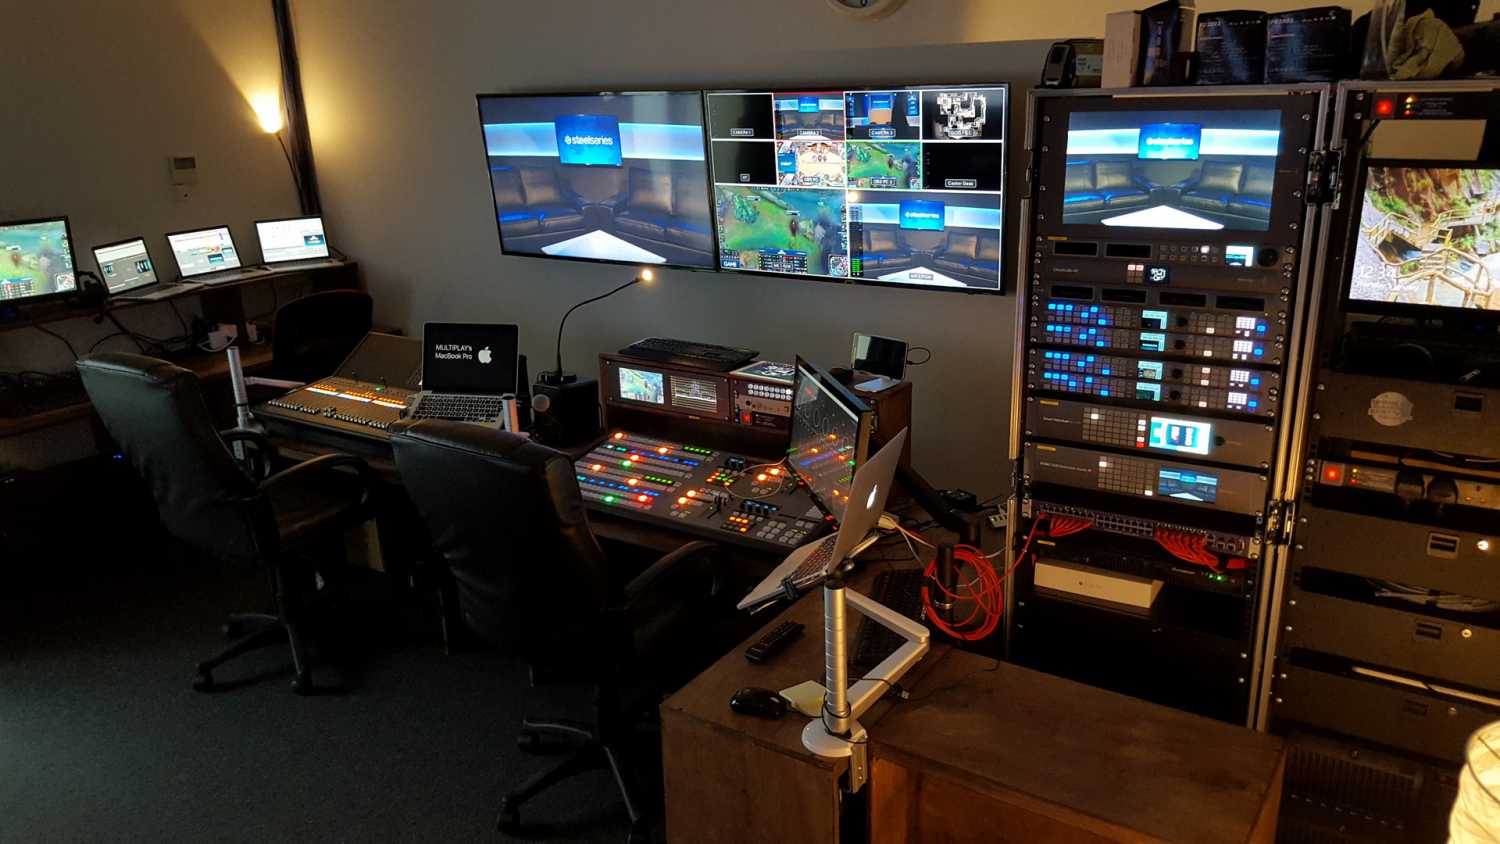 The studio has been used to broadcast a wide range of programmes to thousands of gamers and fans